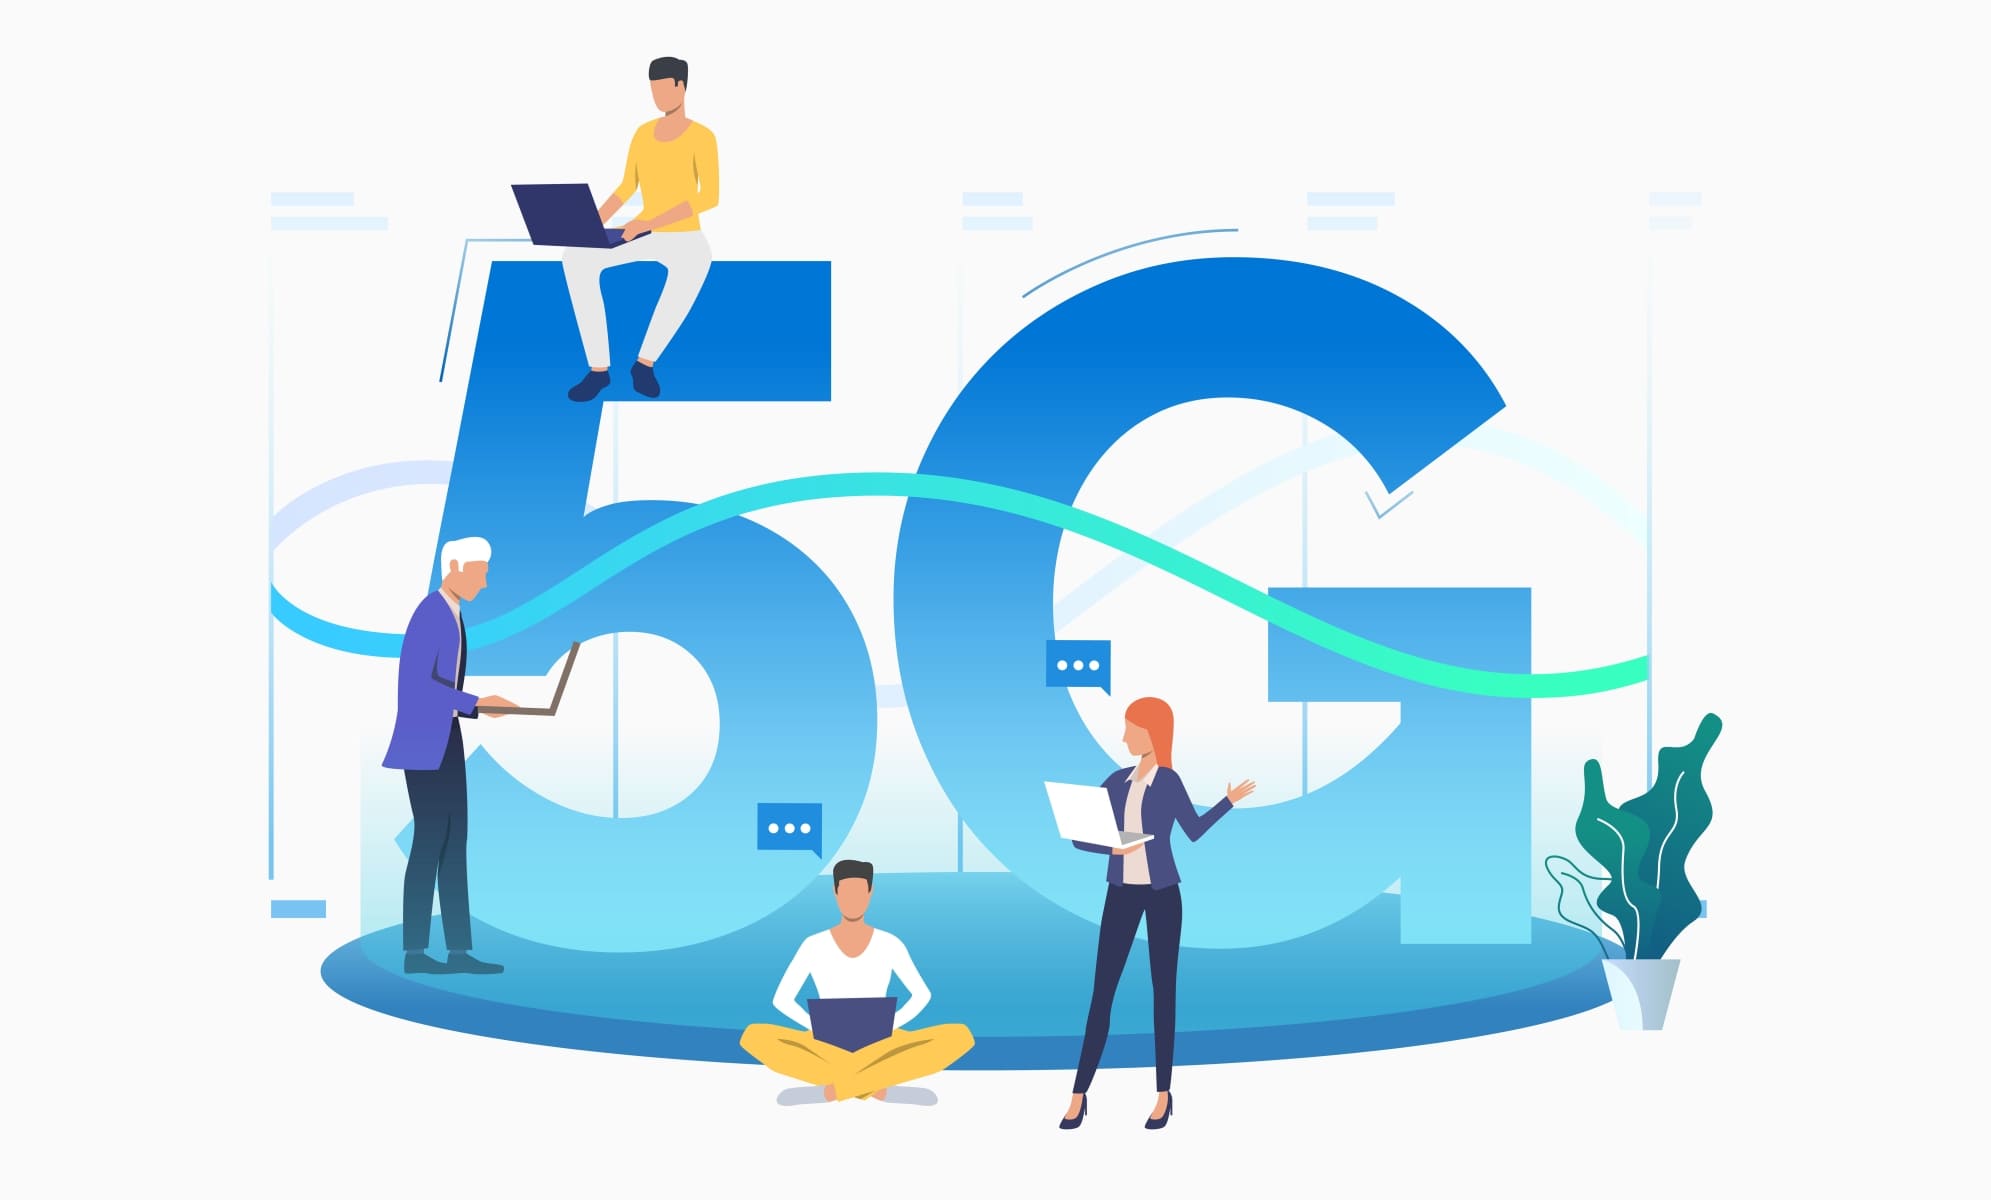 HOW 5G IS GOING TO IMPACT DIGITAL MARKETING LANDSCAPE IN INDIA